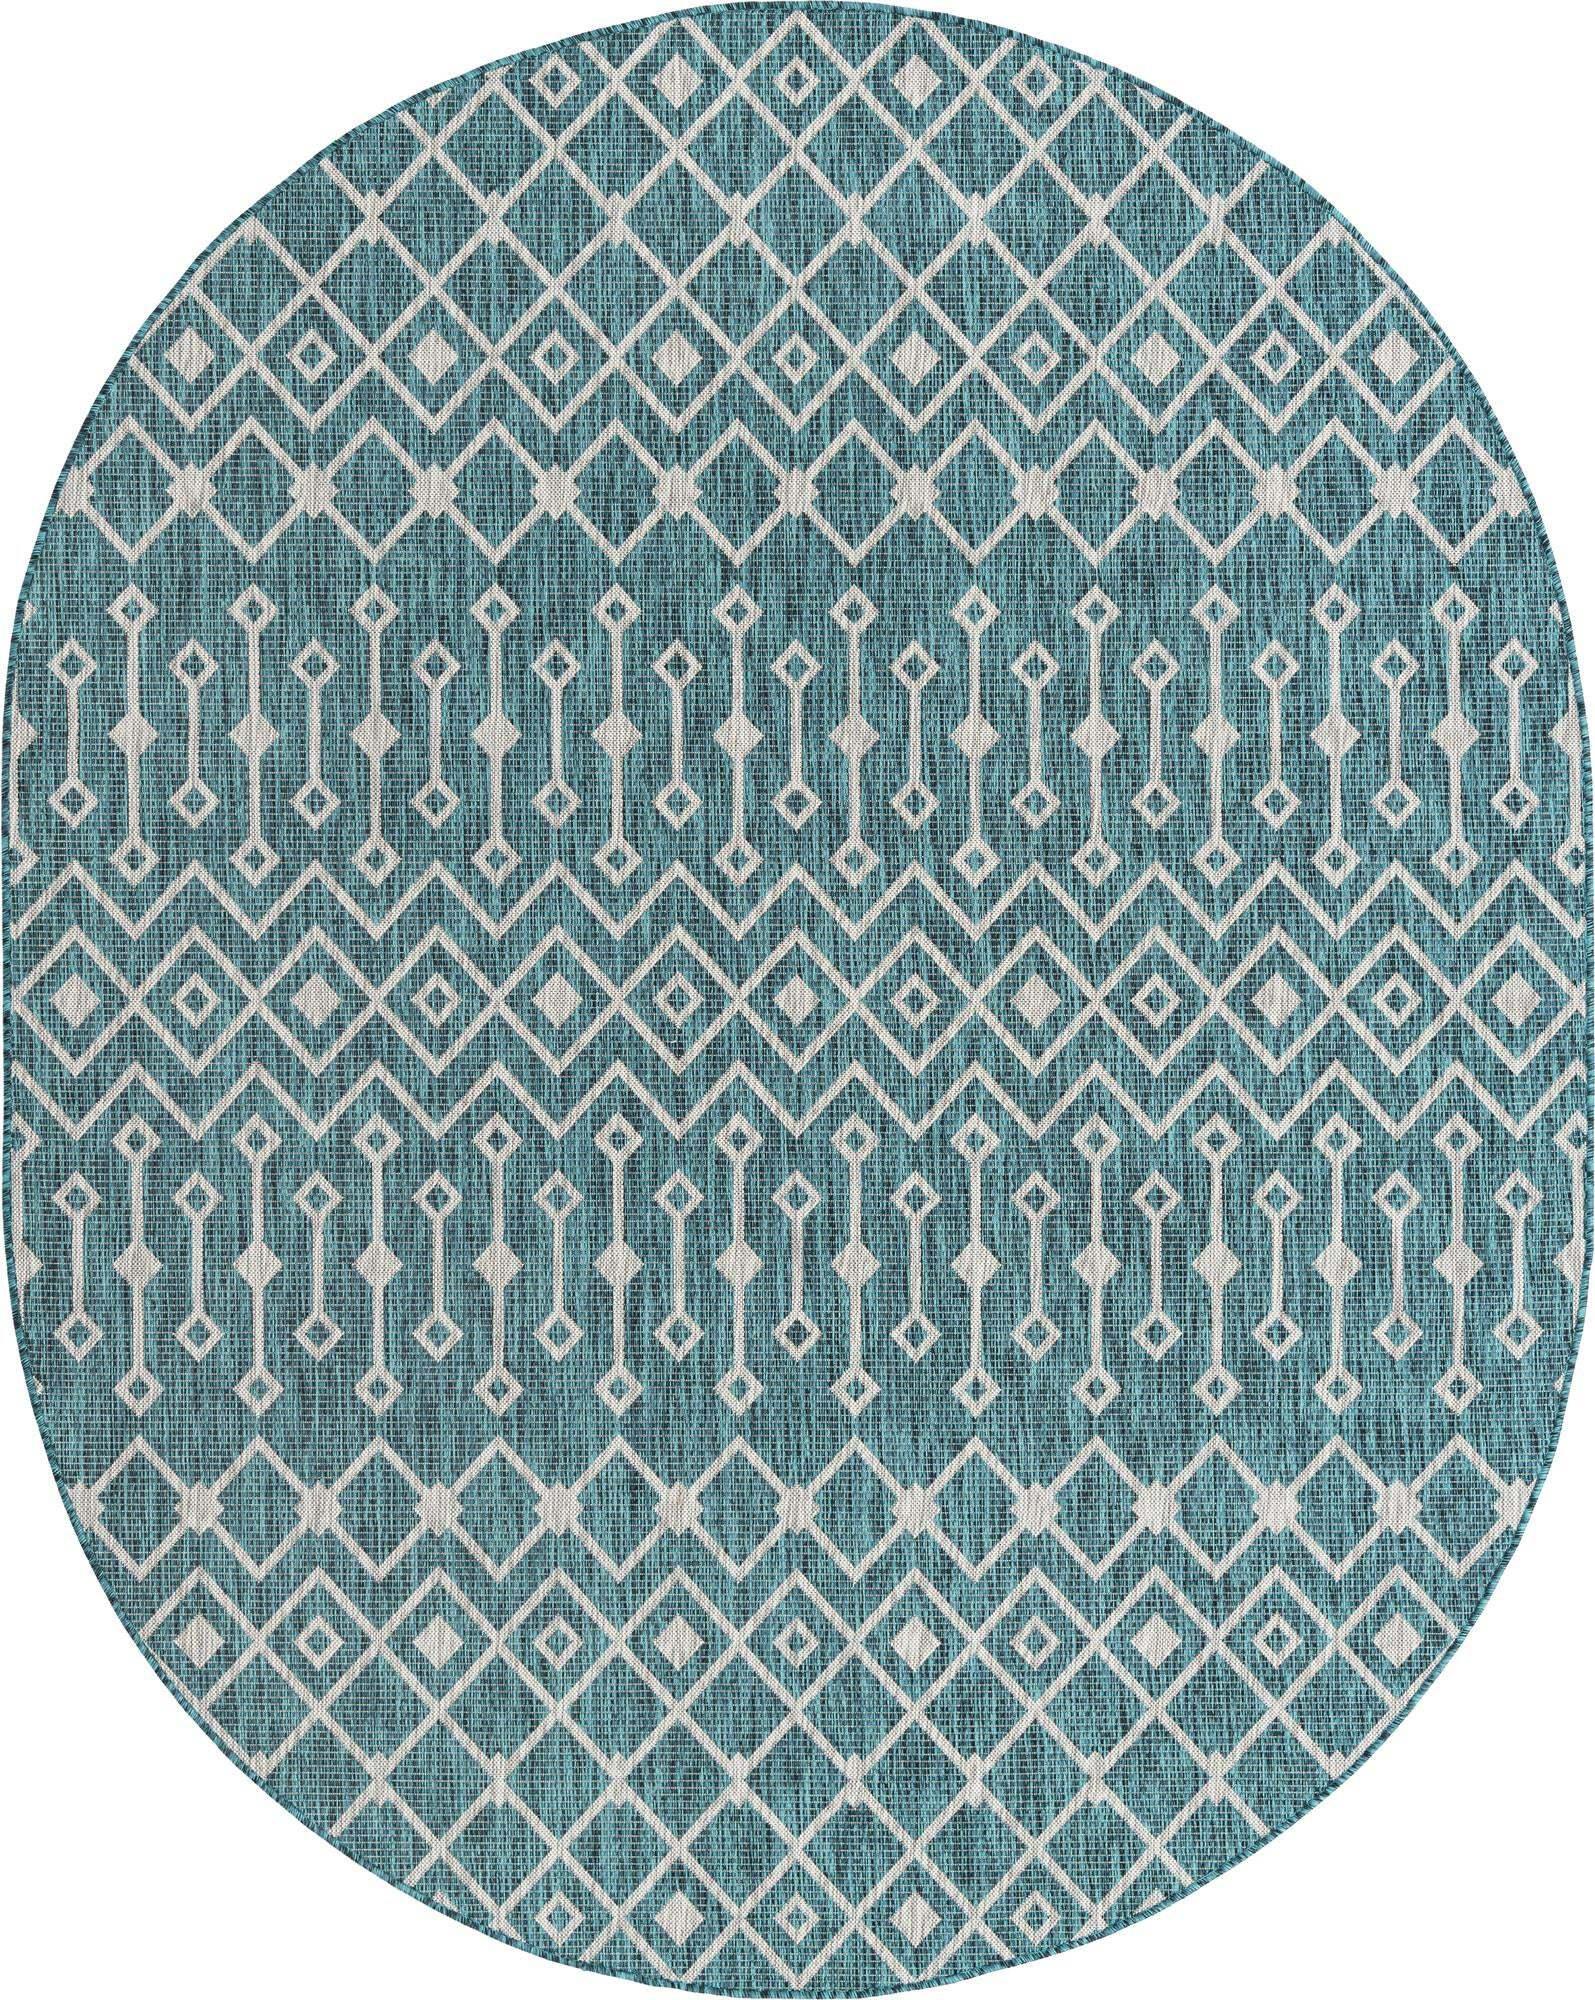 Unique Loom Outdoor Rugs - Outdoor Trellis Geometric Oval 8x10 Oval Rug Teal & Gray